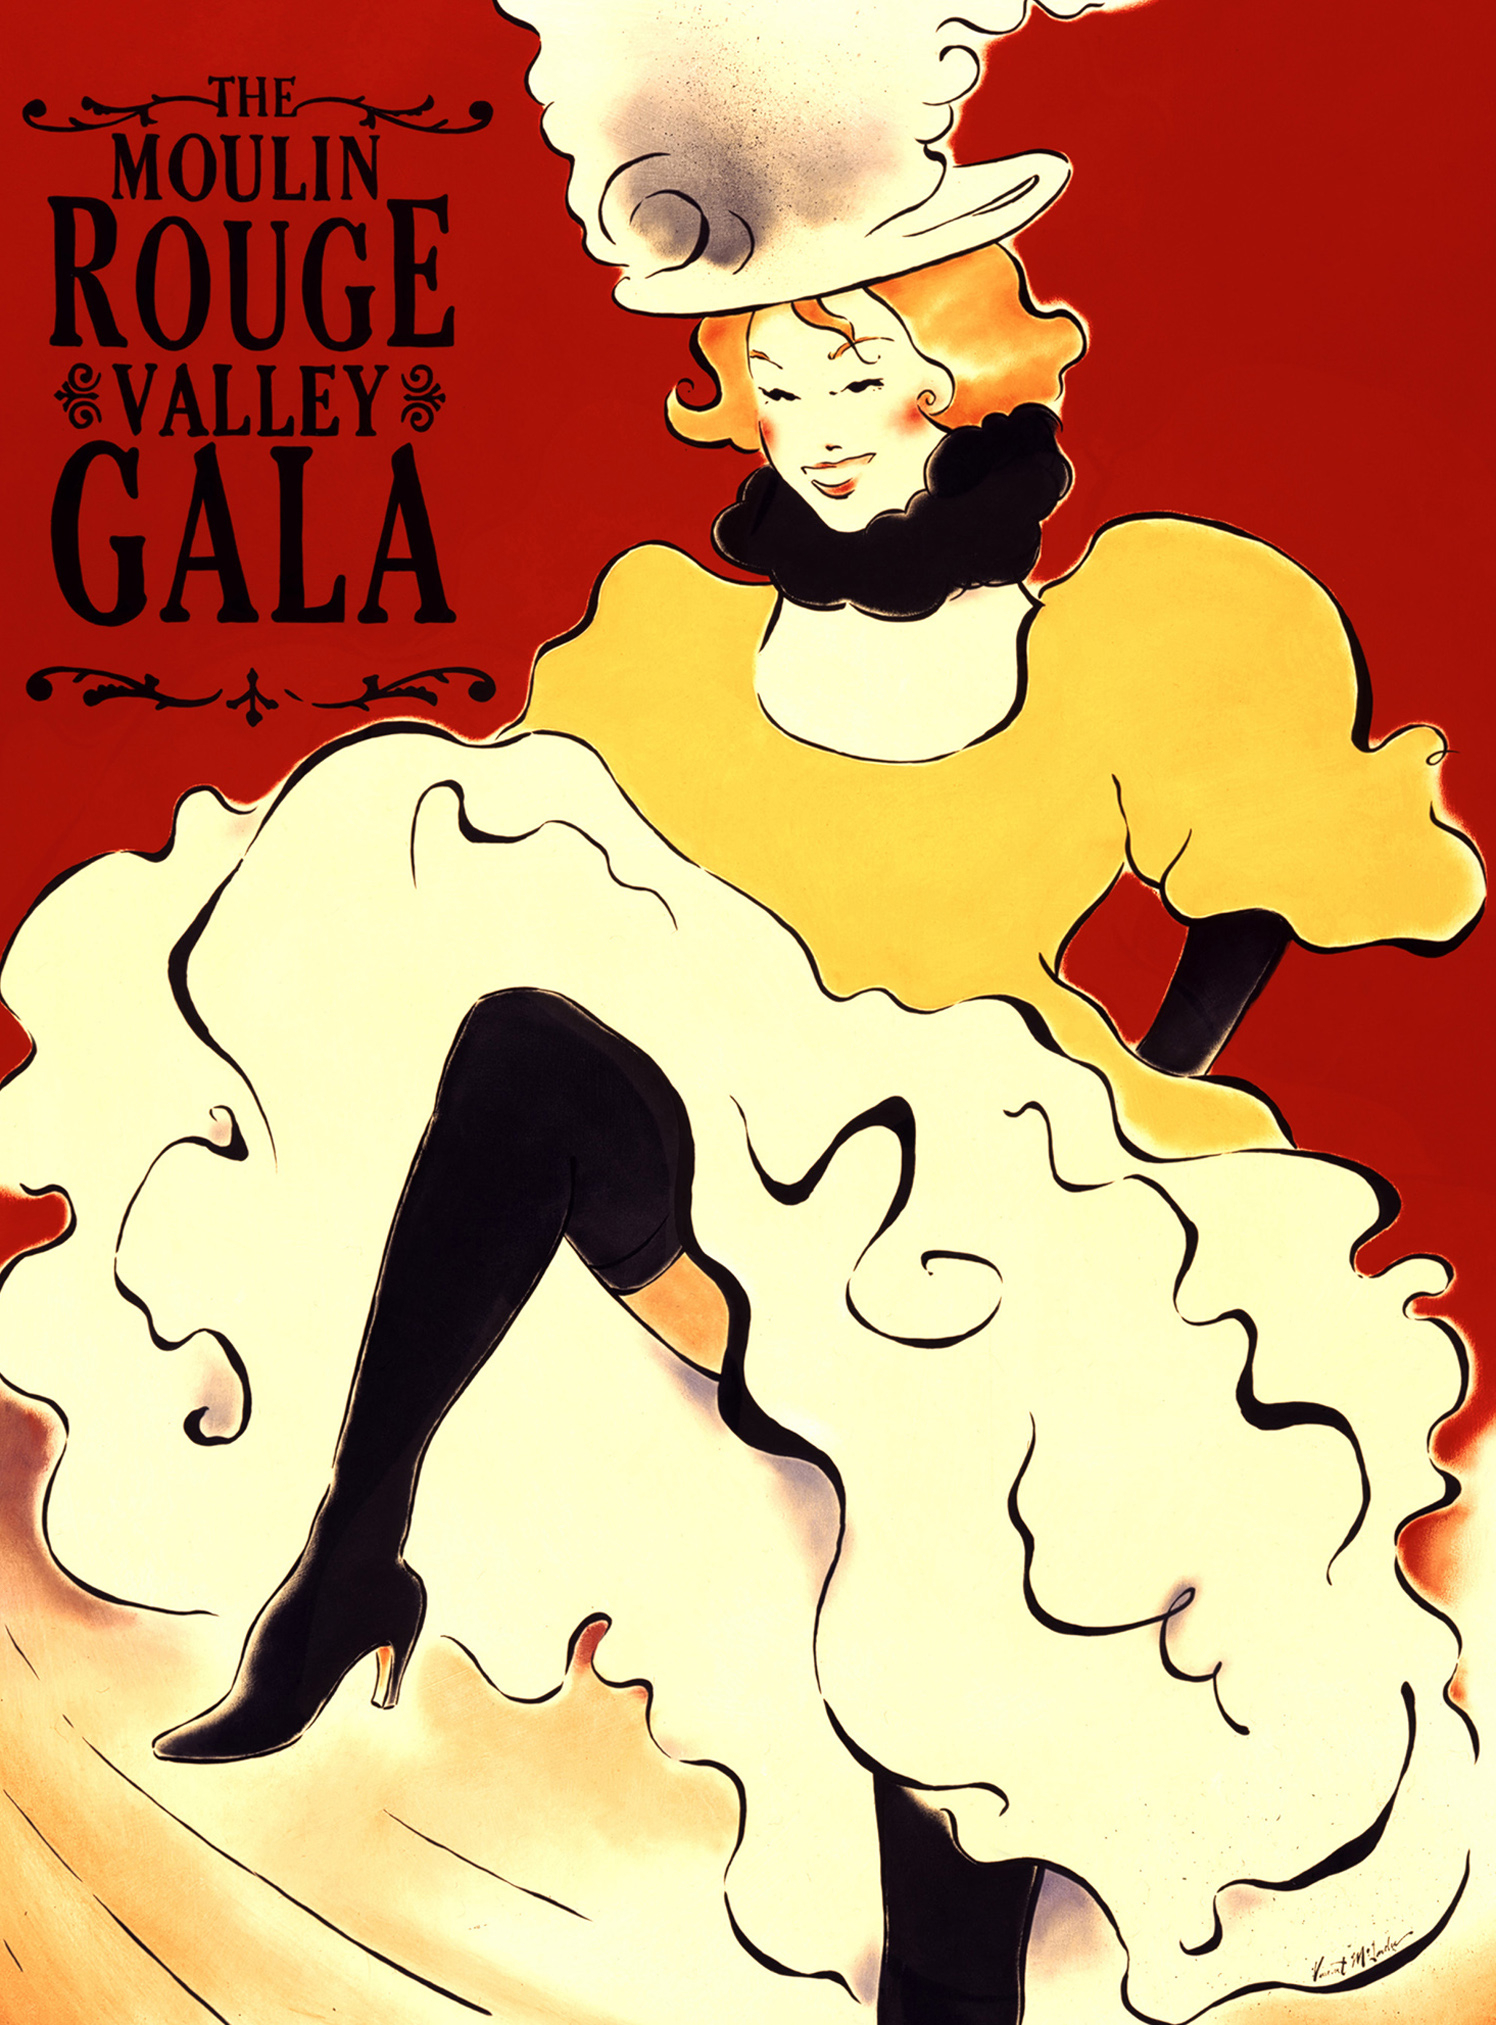 The Moulin Rouge Valley Gala